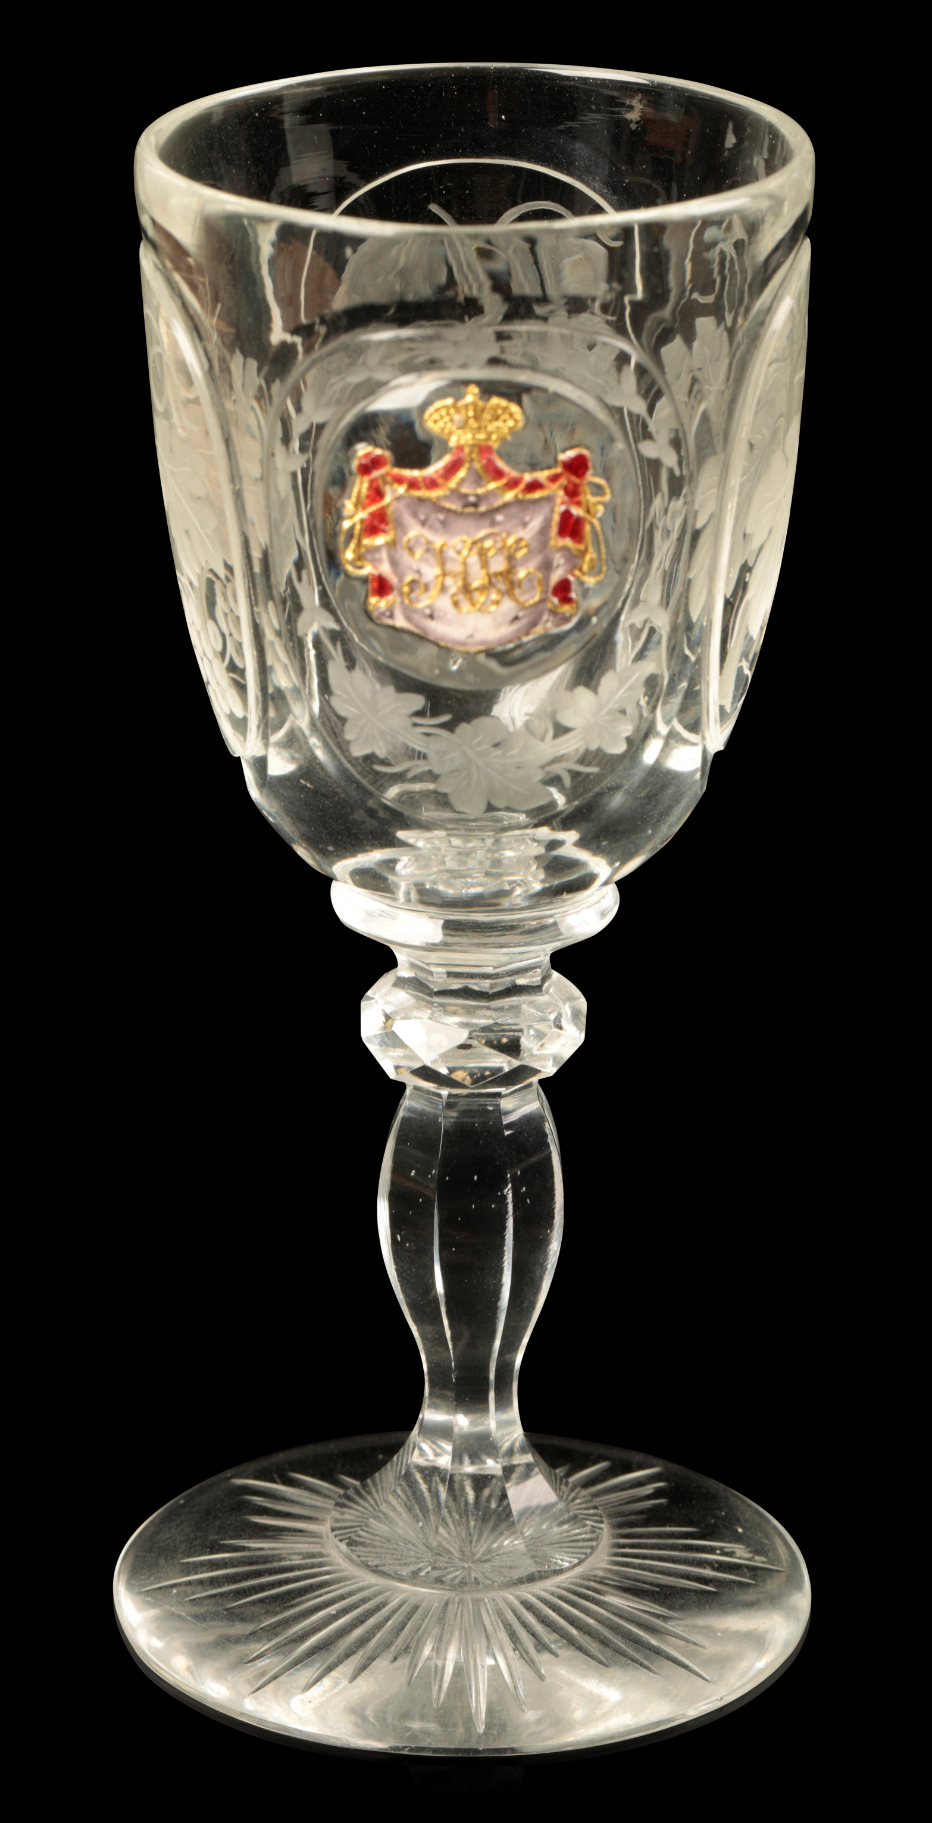 A RUSSIAN GLASS likely from the 3adf0e